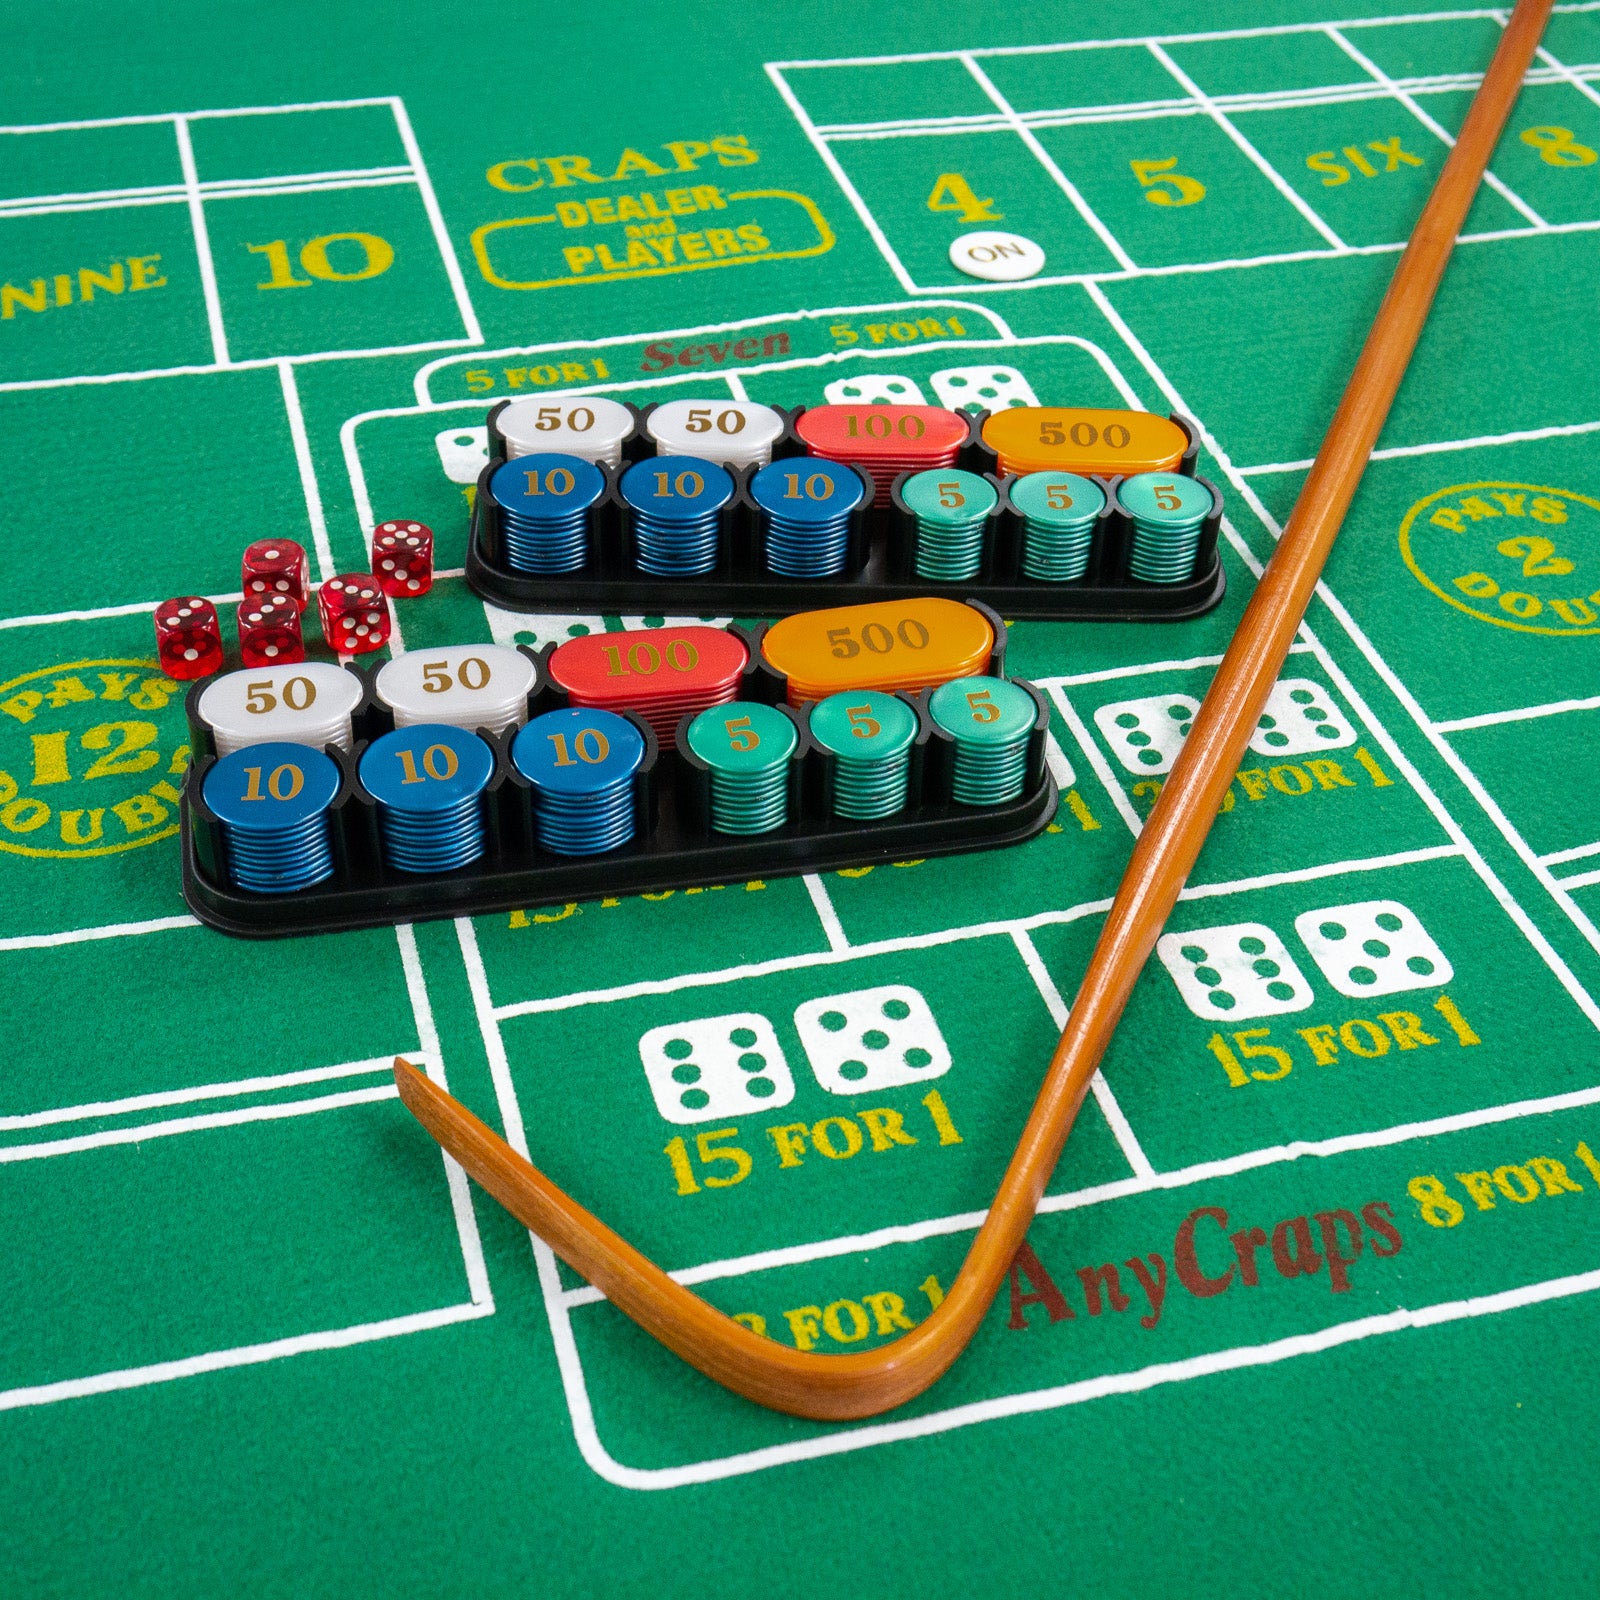 Complete Craps Set - Includes Everything You Need to Play Craps!